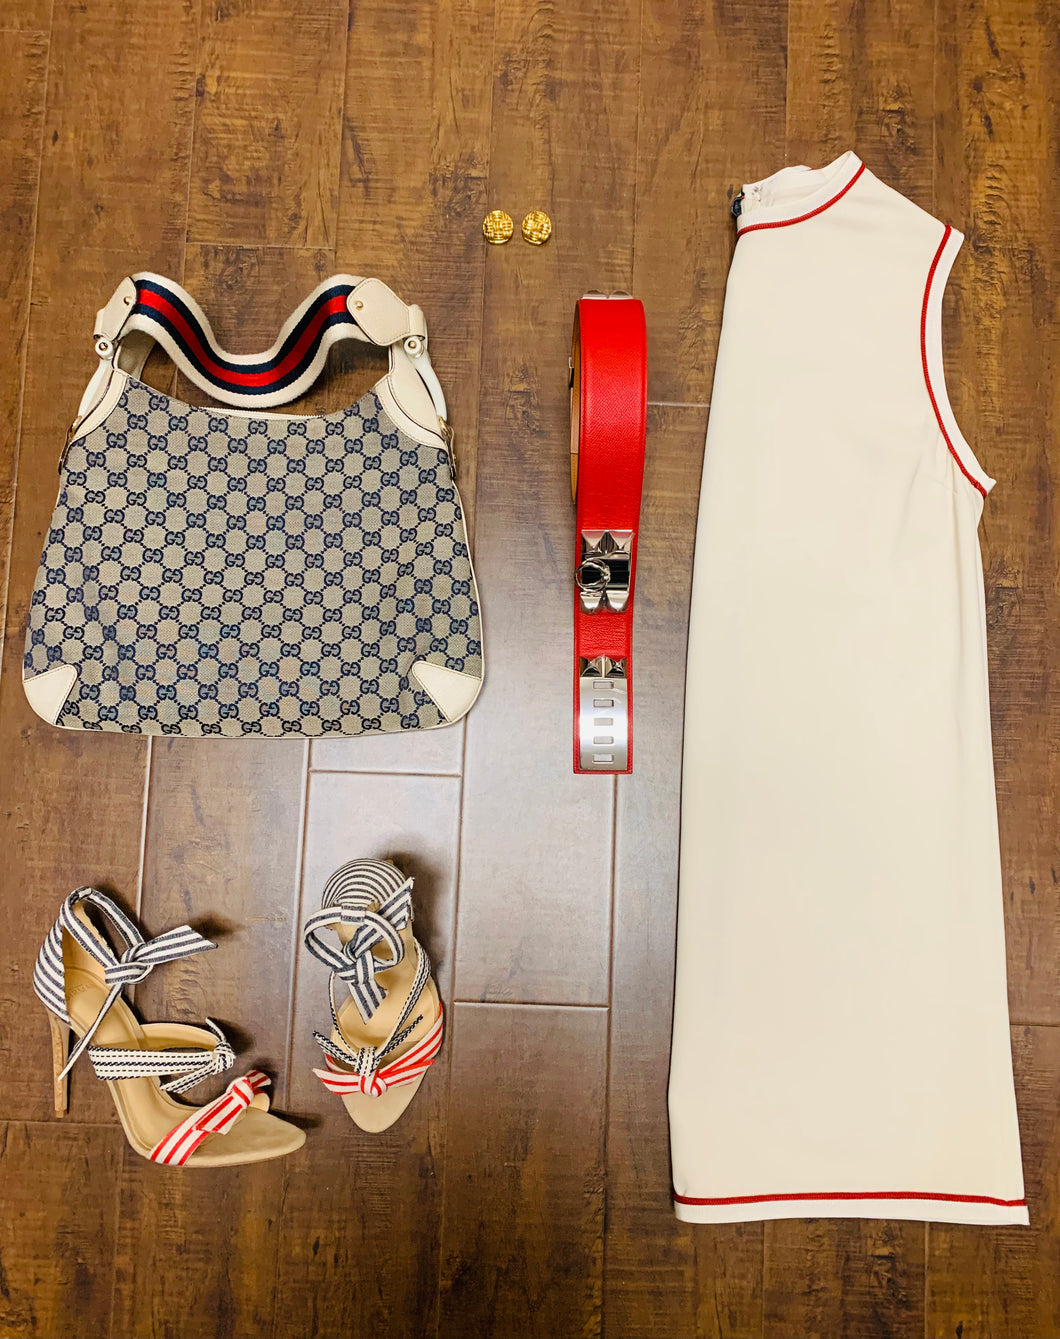 Gucci Ivory and Red Mini Dress Size 40